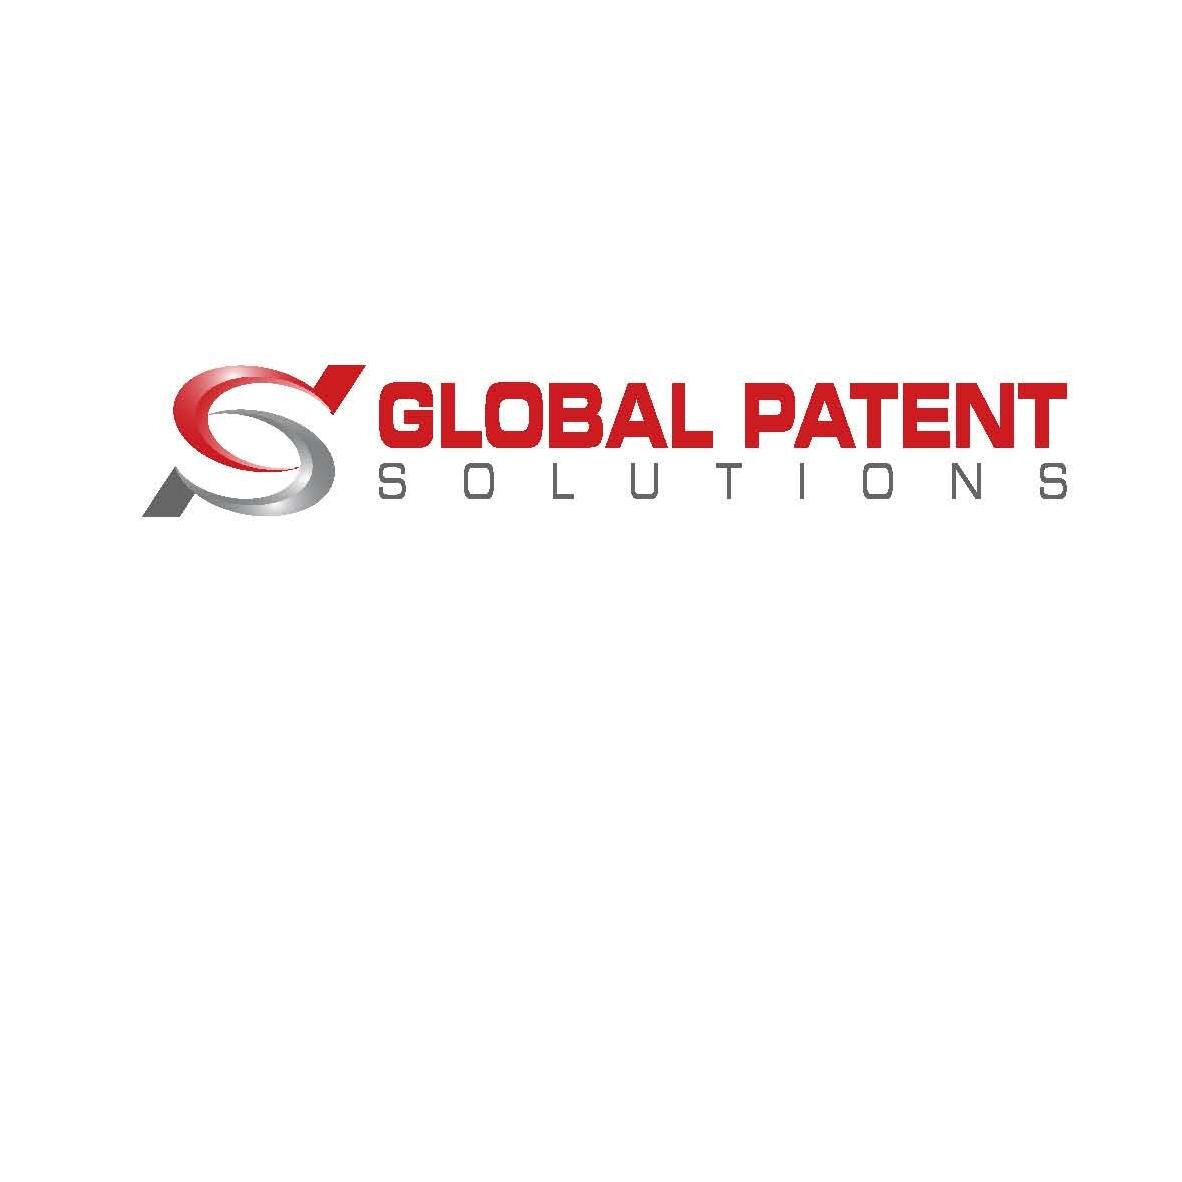 This profile was created by Robb Evans at Global Patent Solutions, LLC.  Global Patent Solutions is an intellectual property research and consulting firm.